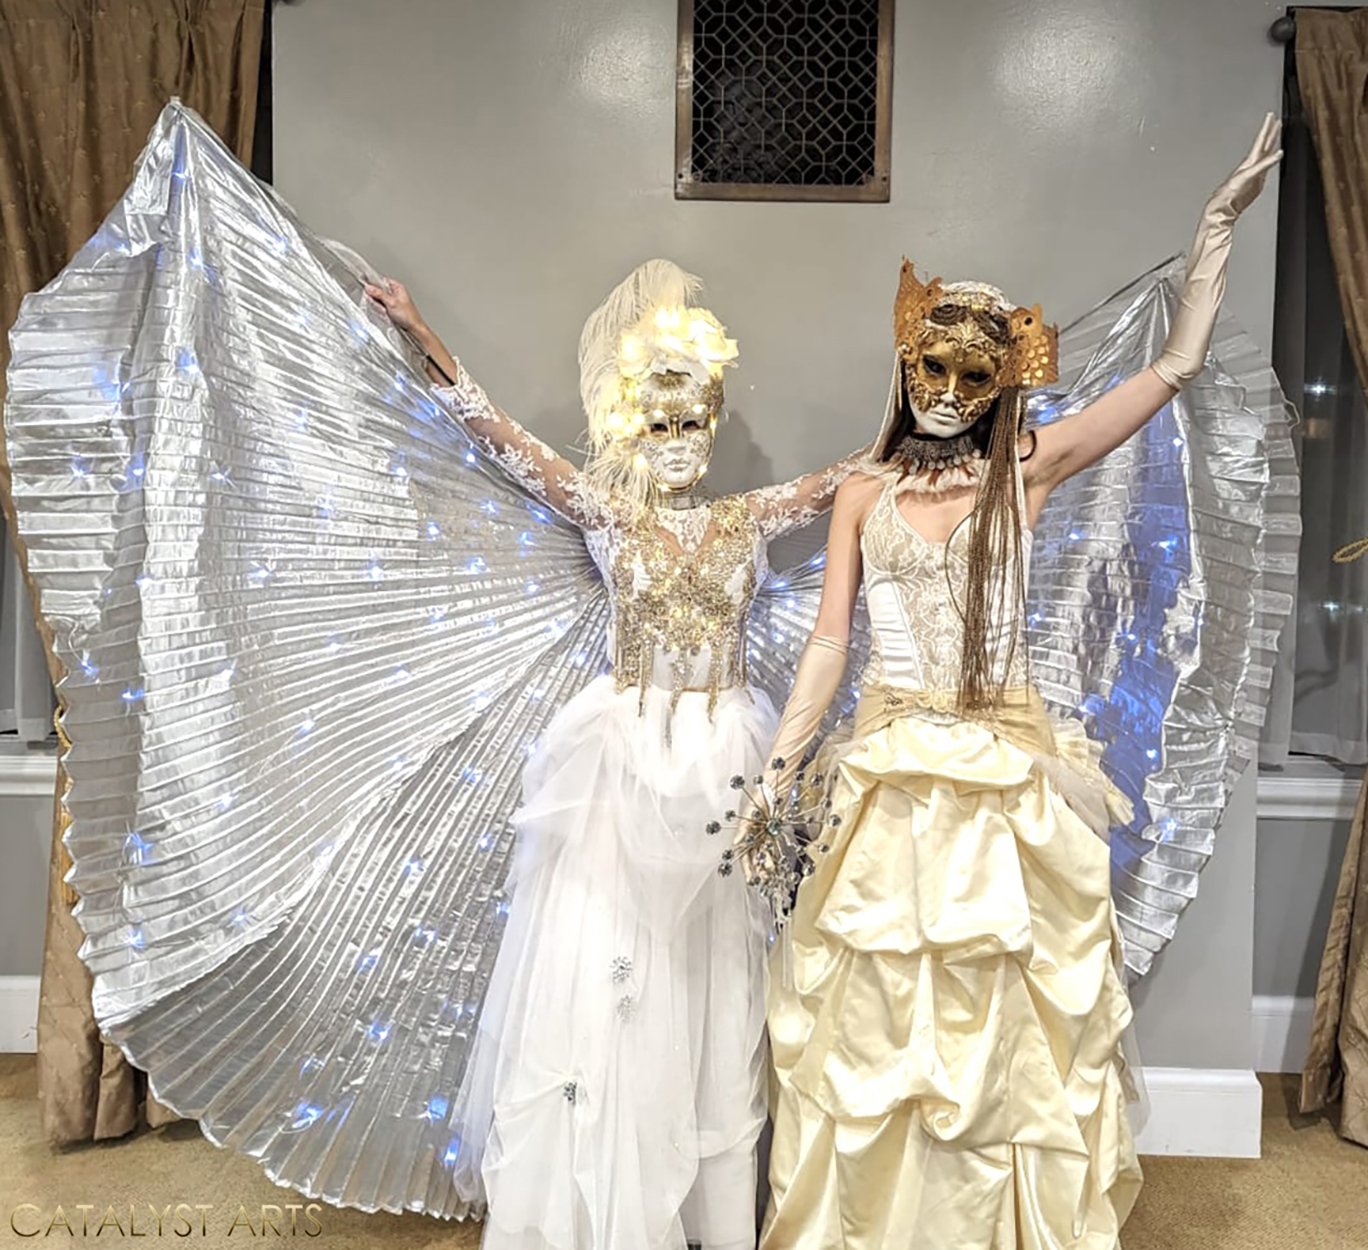 Venetian masked performers dancers at Bay Area Holiday Party, Catalyst Arts Elevated Entertainment 